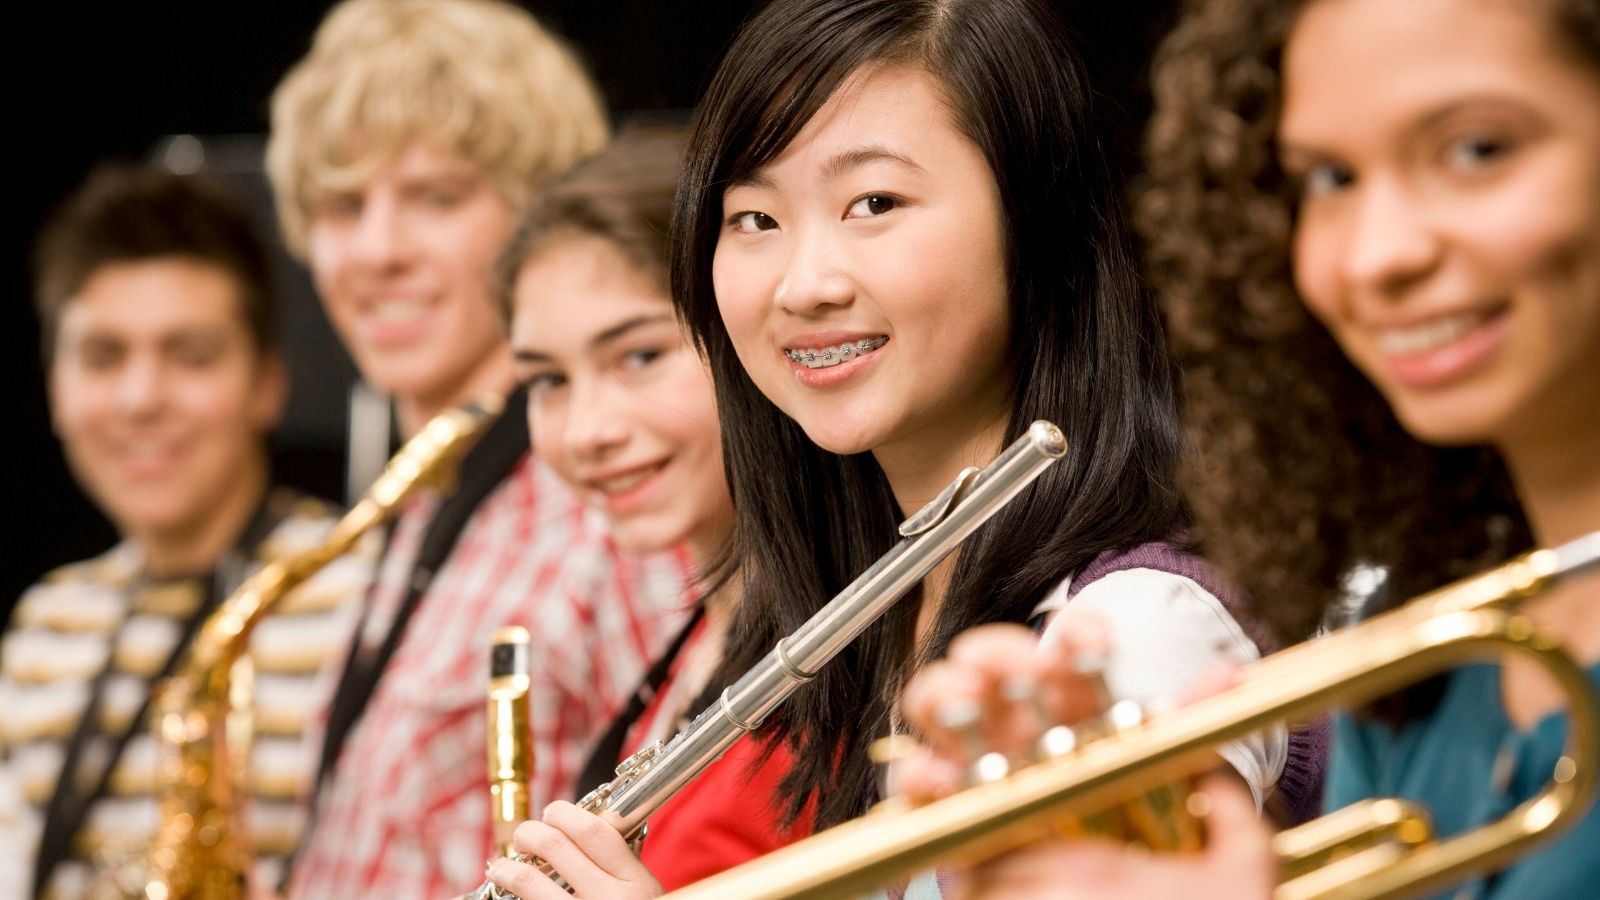 Five students in a high school music class